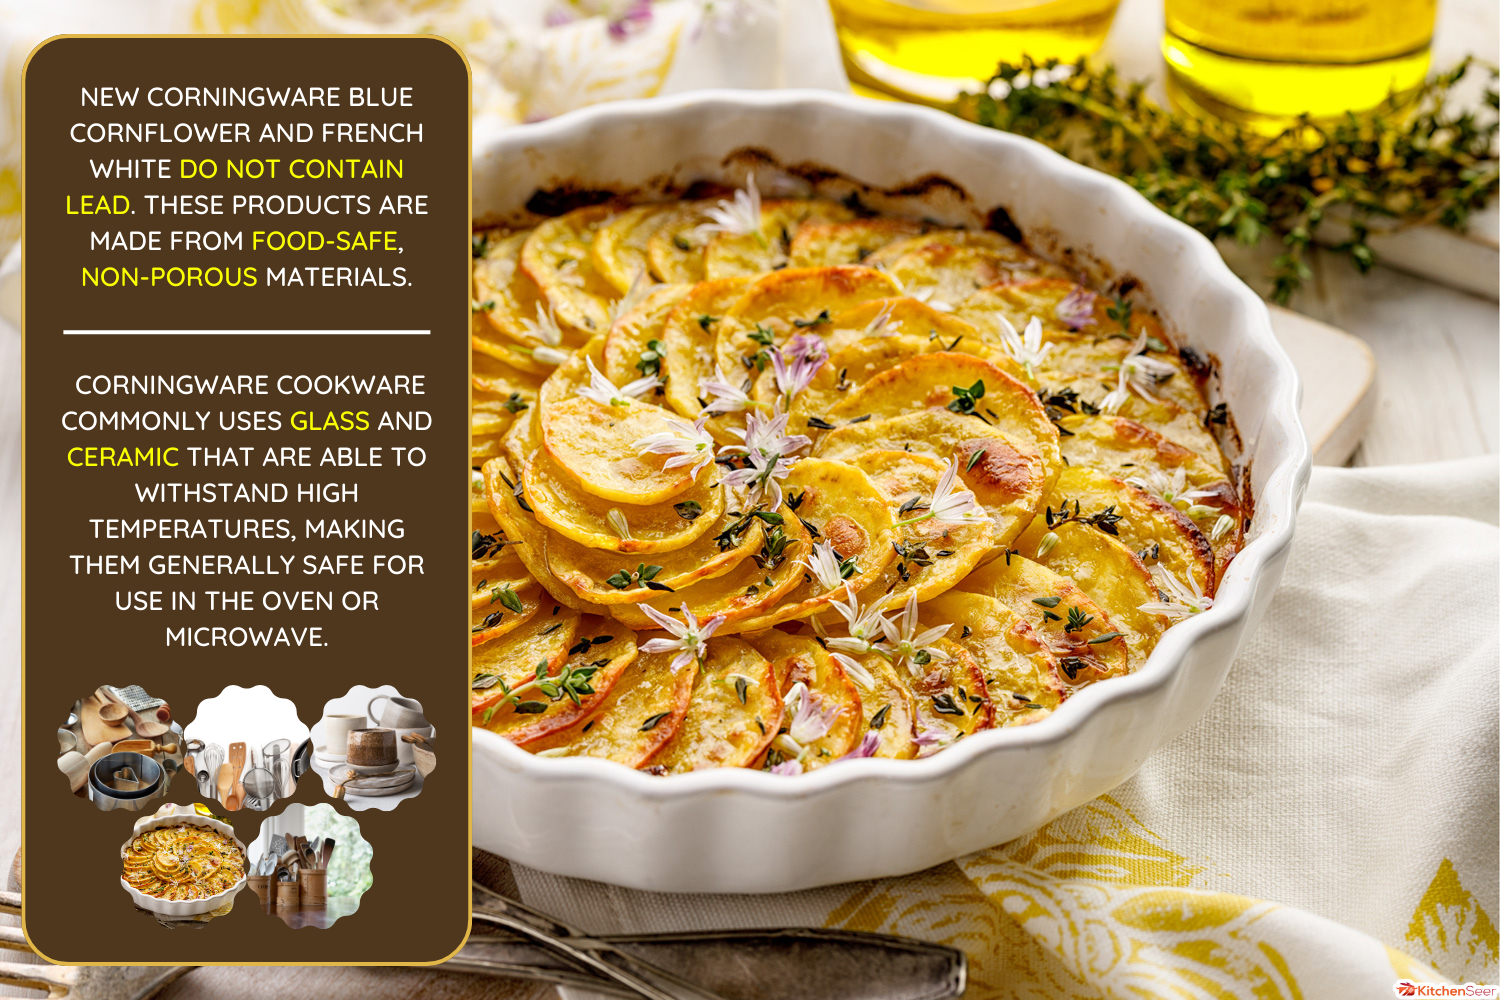 Scalloped potatoes, potato casserole with the addition of herbs and edible chives flowers in a ceramic baking dish - Does Corningware Contain Lead [Inc. Blue Cornflower, Spice Of Life, & French White]